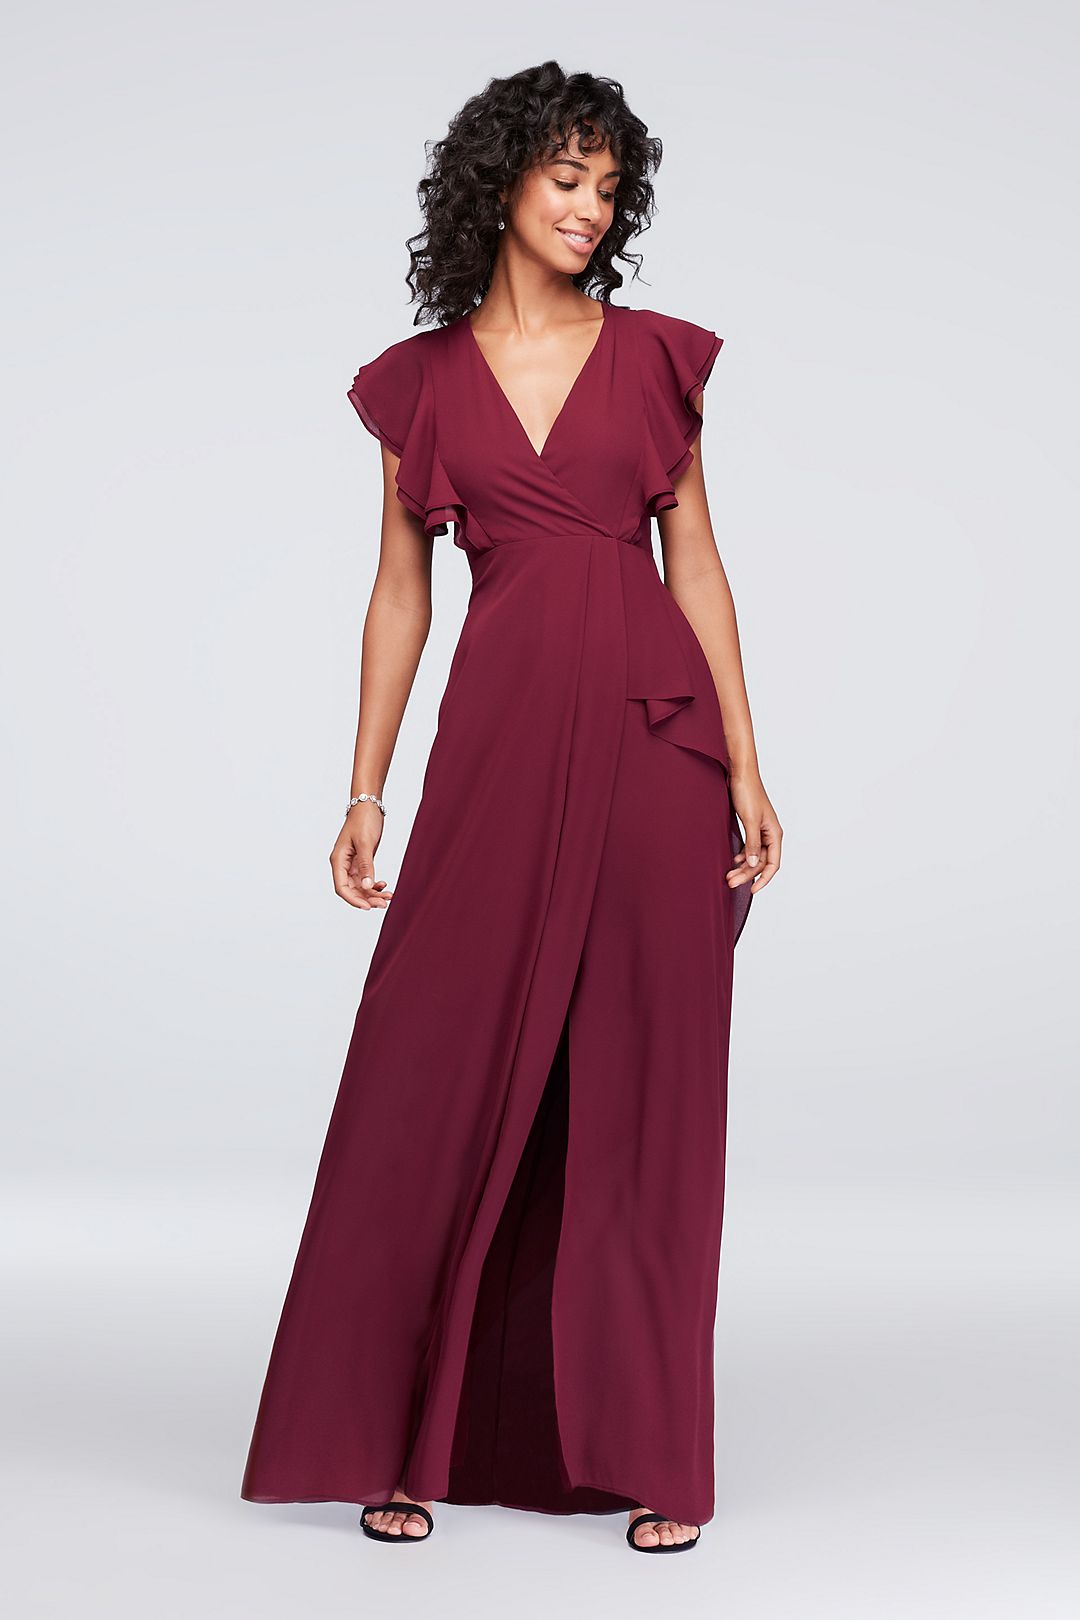 Chiffon Bridesmaid Dress with Flutter Sleeve Image 1